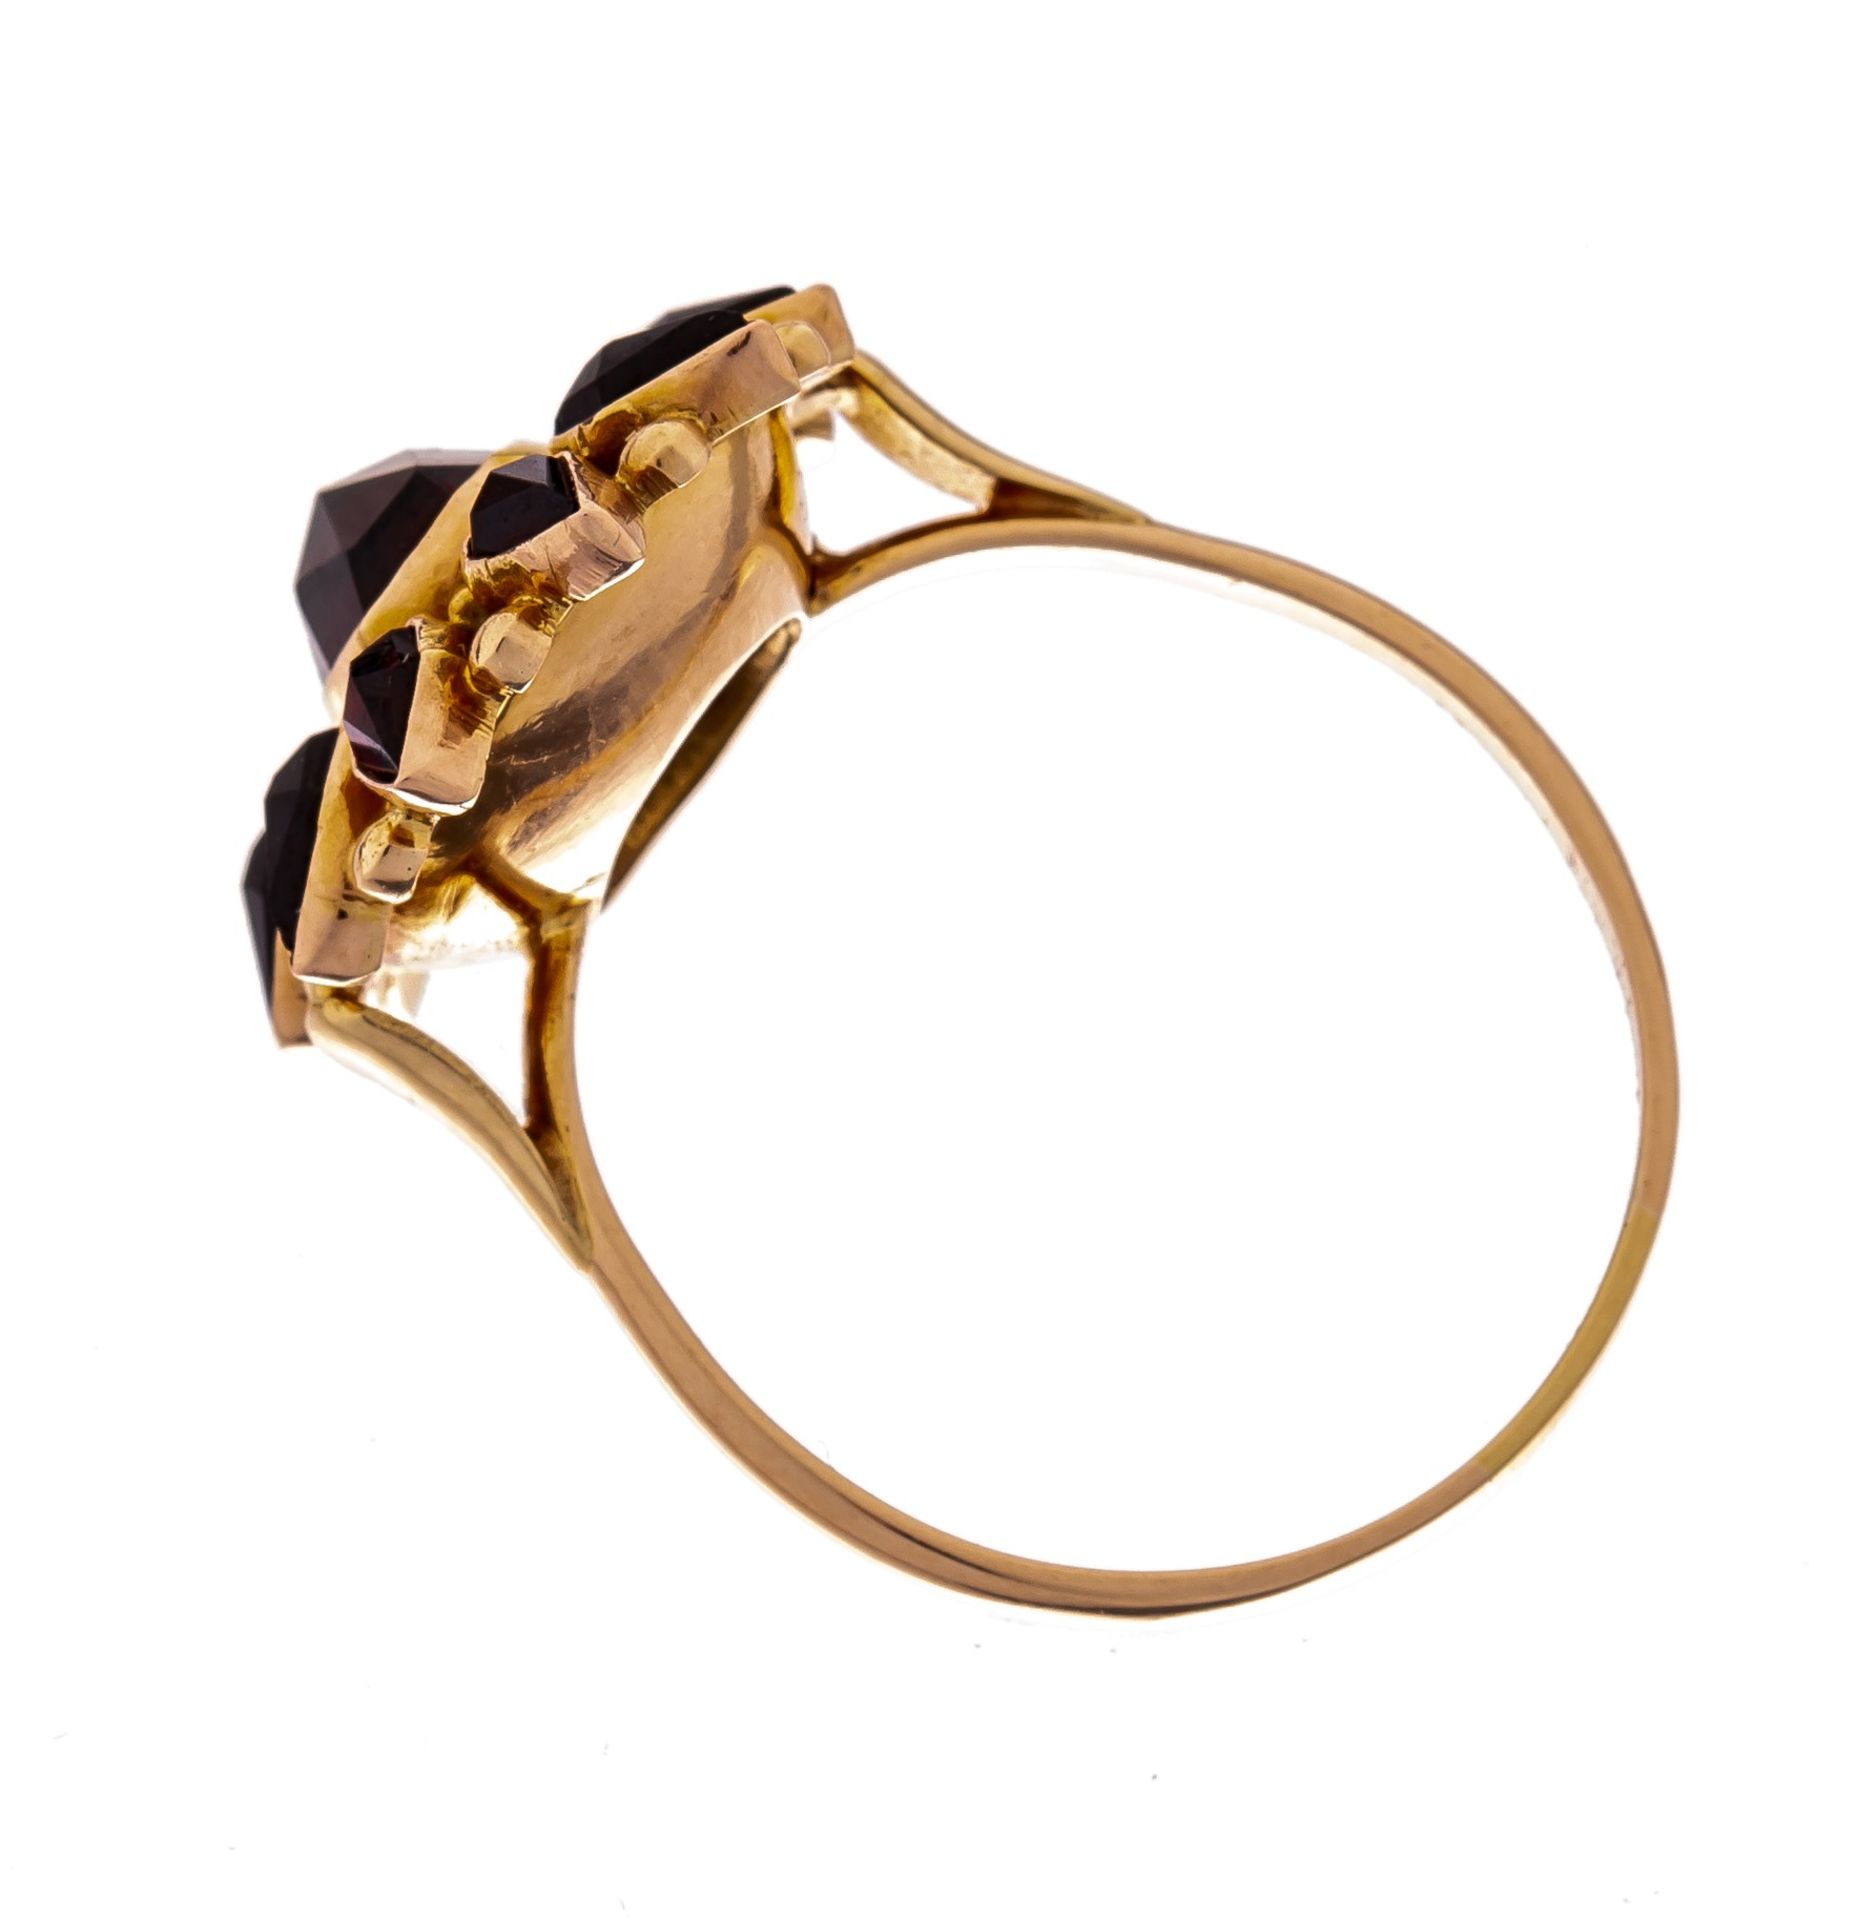 A floral-shaped ring in 18ct yellow gold, set with garnets, 4 g - Image 2 of 4